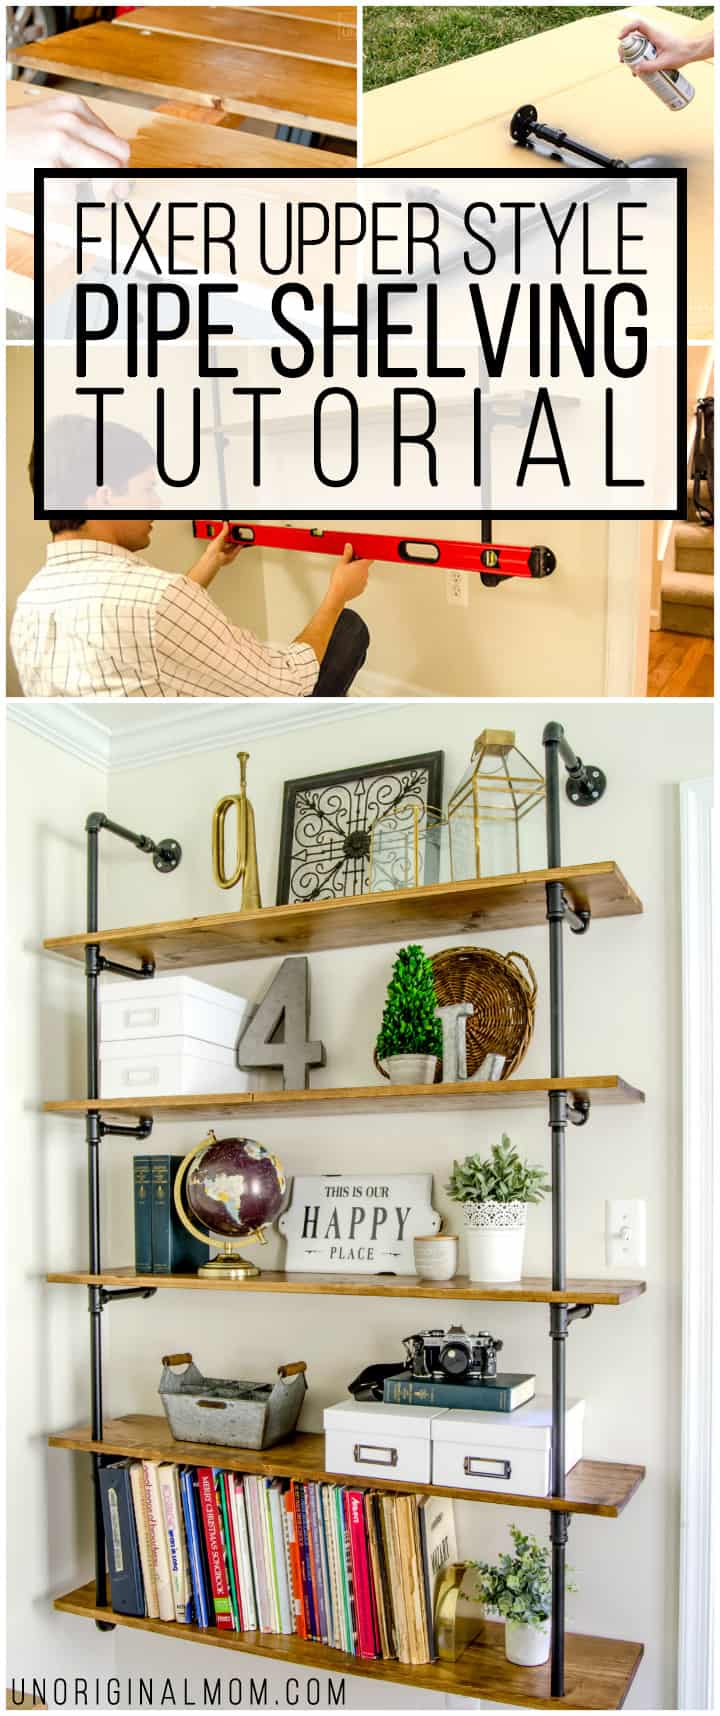 Fixer upper style pipe shelving tutorial